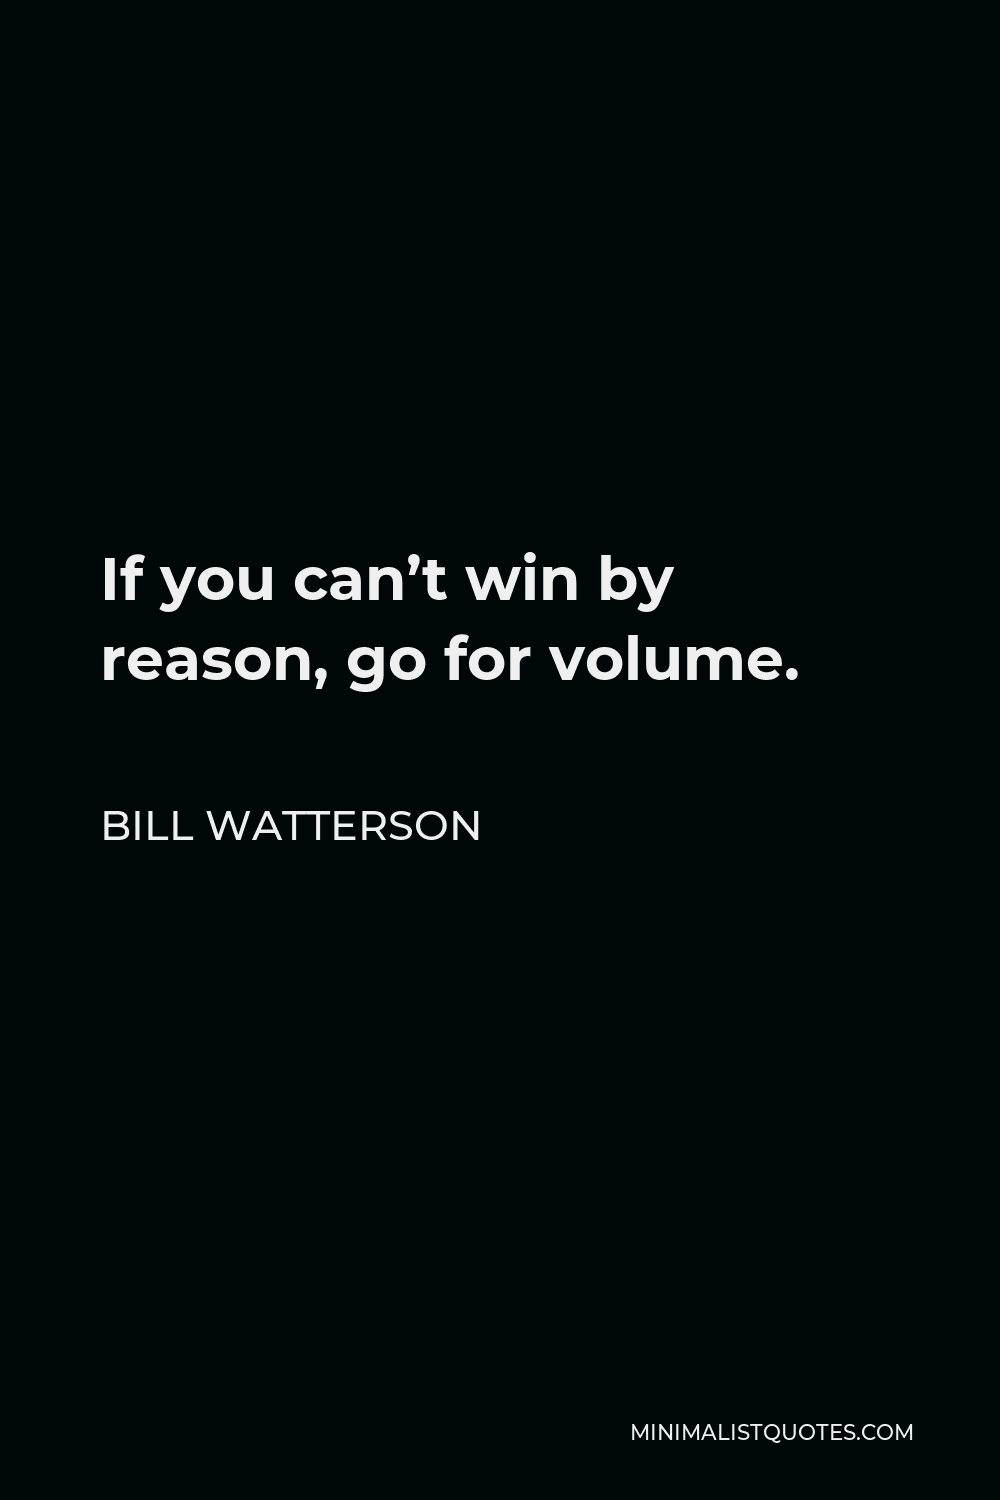 Bill Watterson Quote - If you can’t win by reason, go for volume.